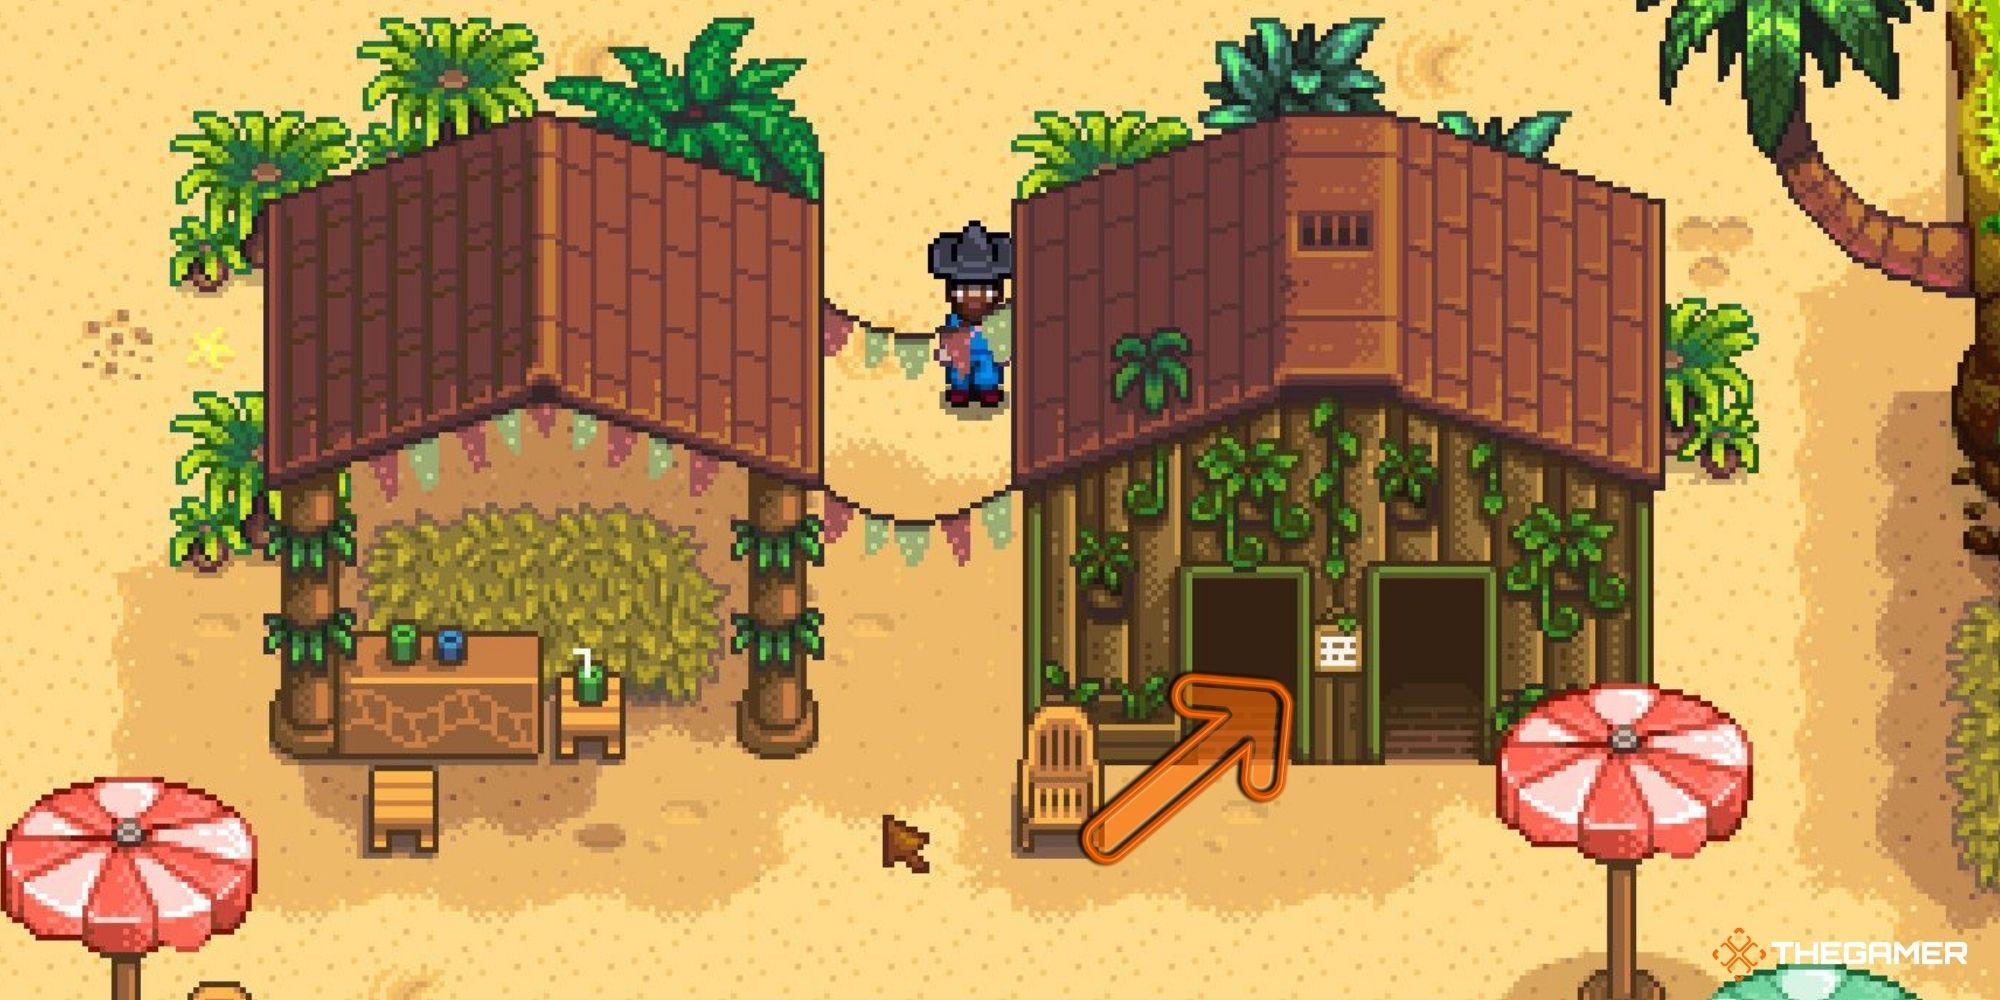 Stardew Valley - Ginger Island Resort with Guide Indicators about how to turn it off